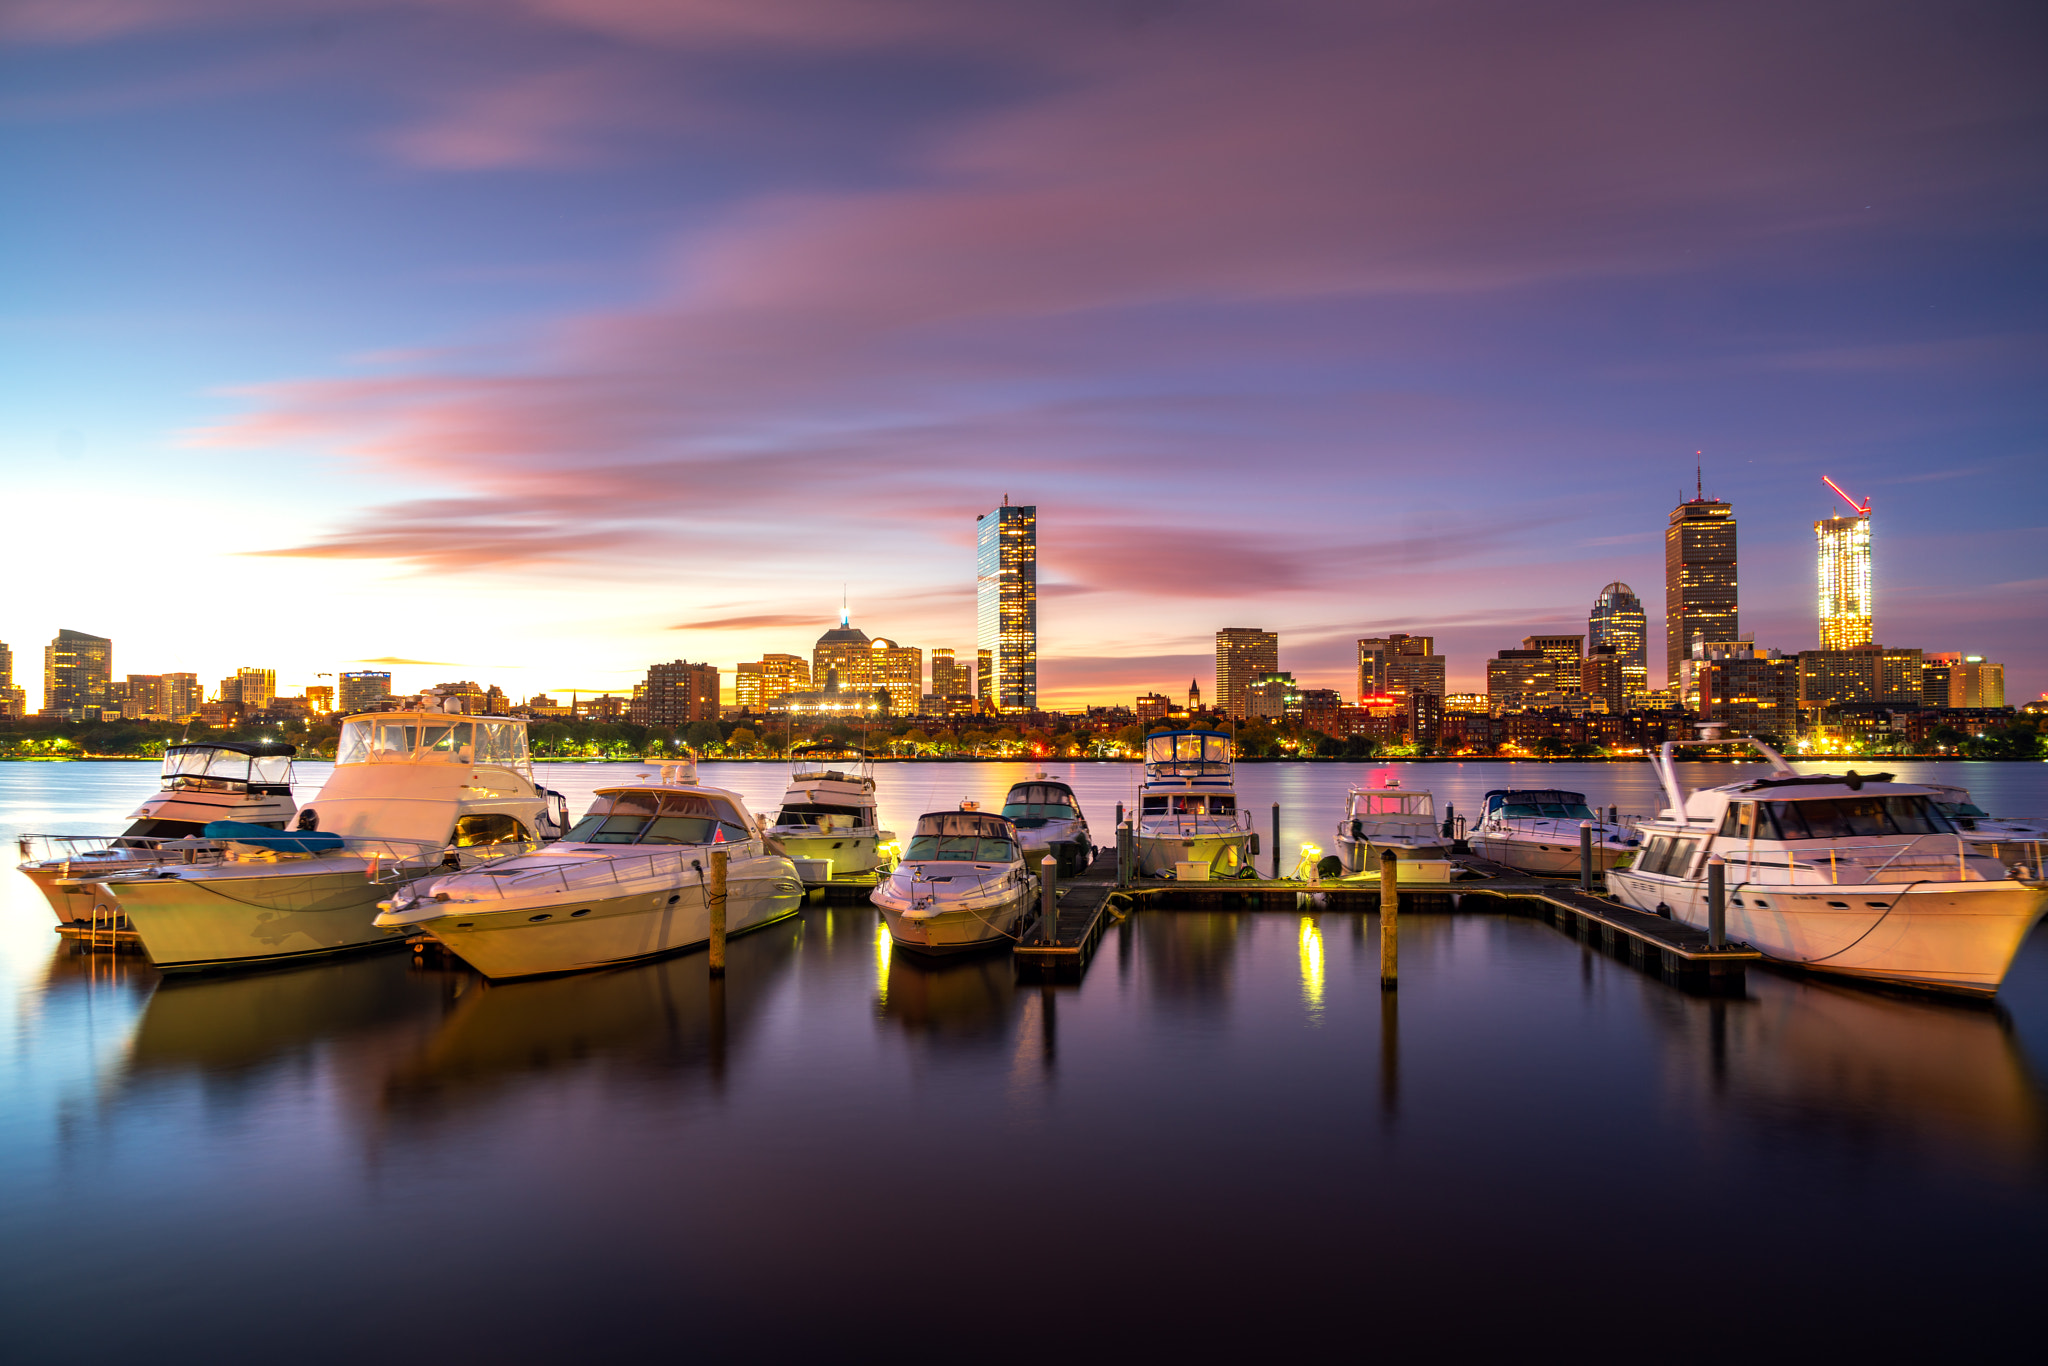 Sunrise over Boston city with boat and harbor